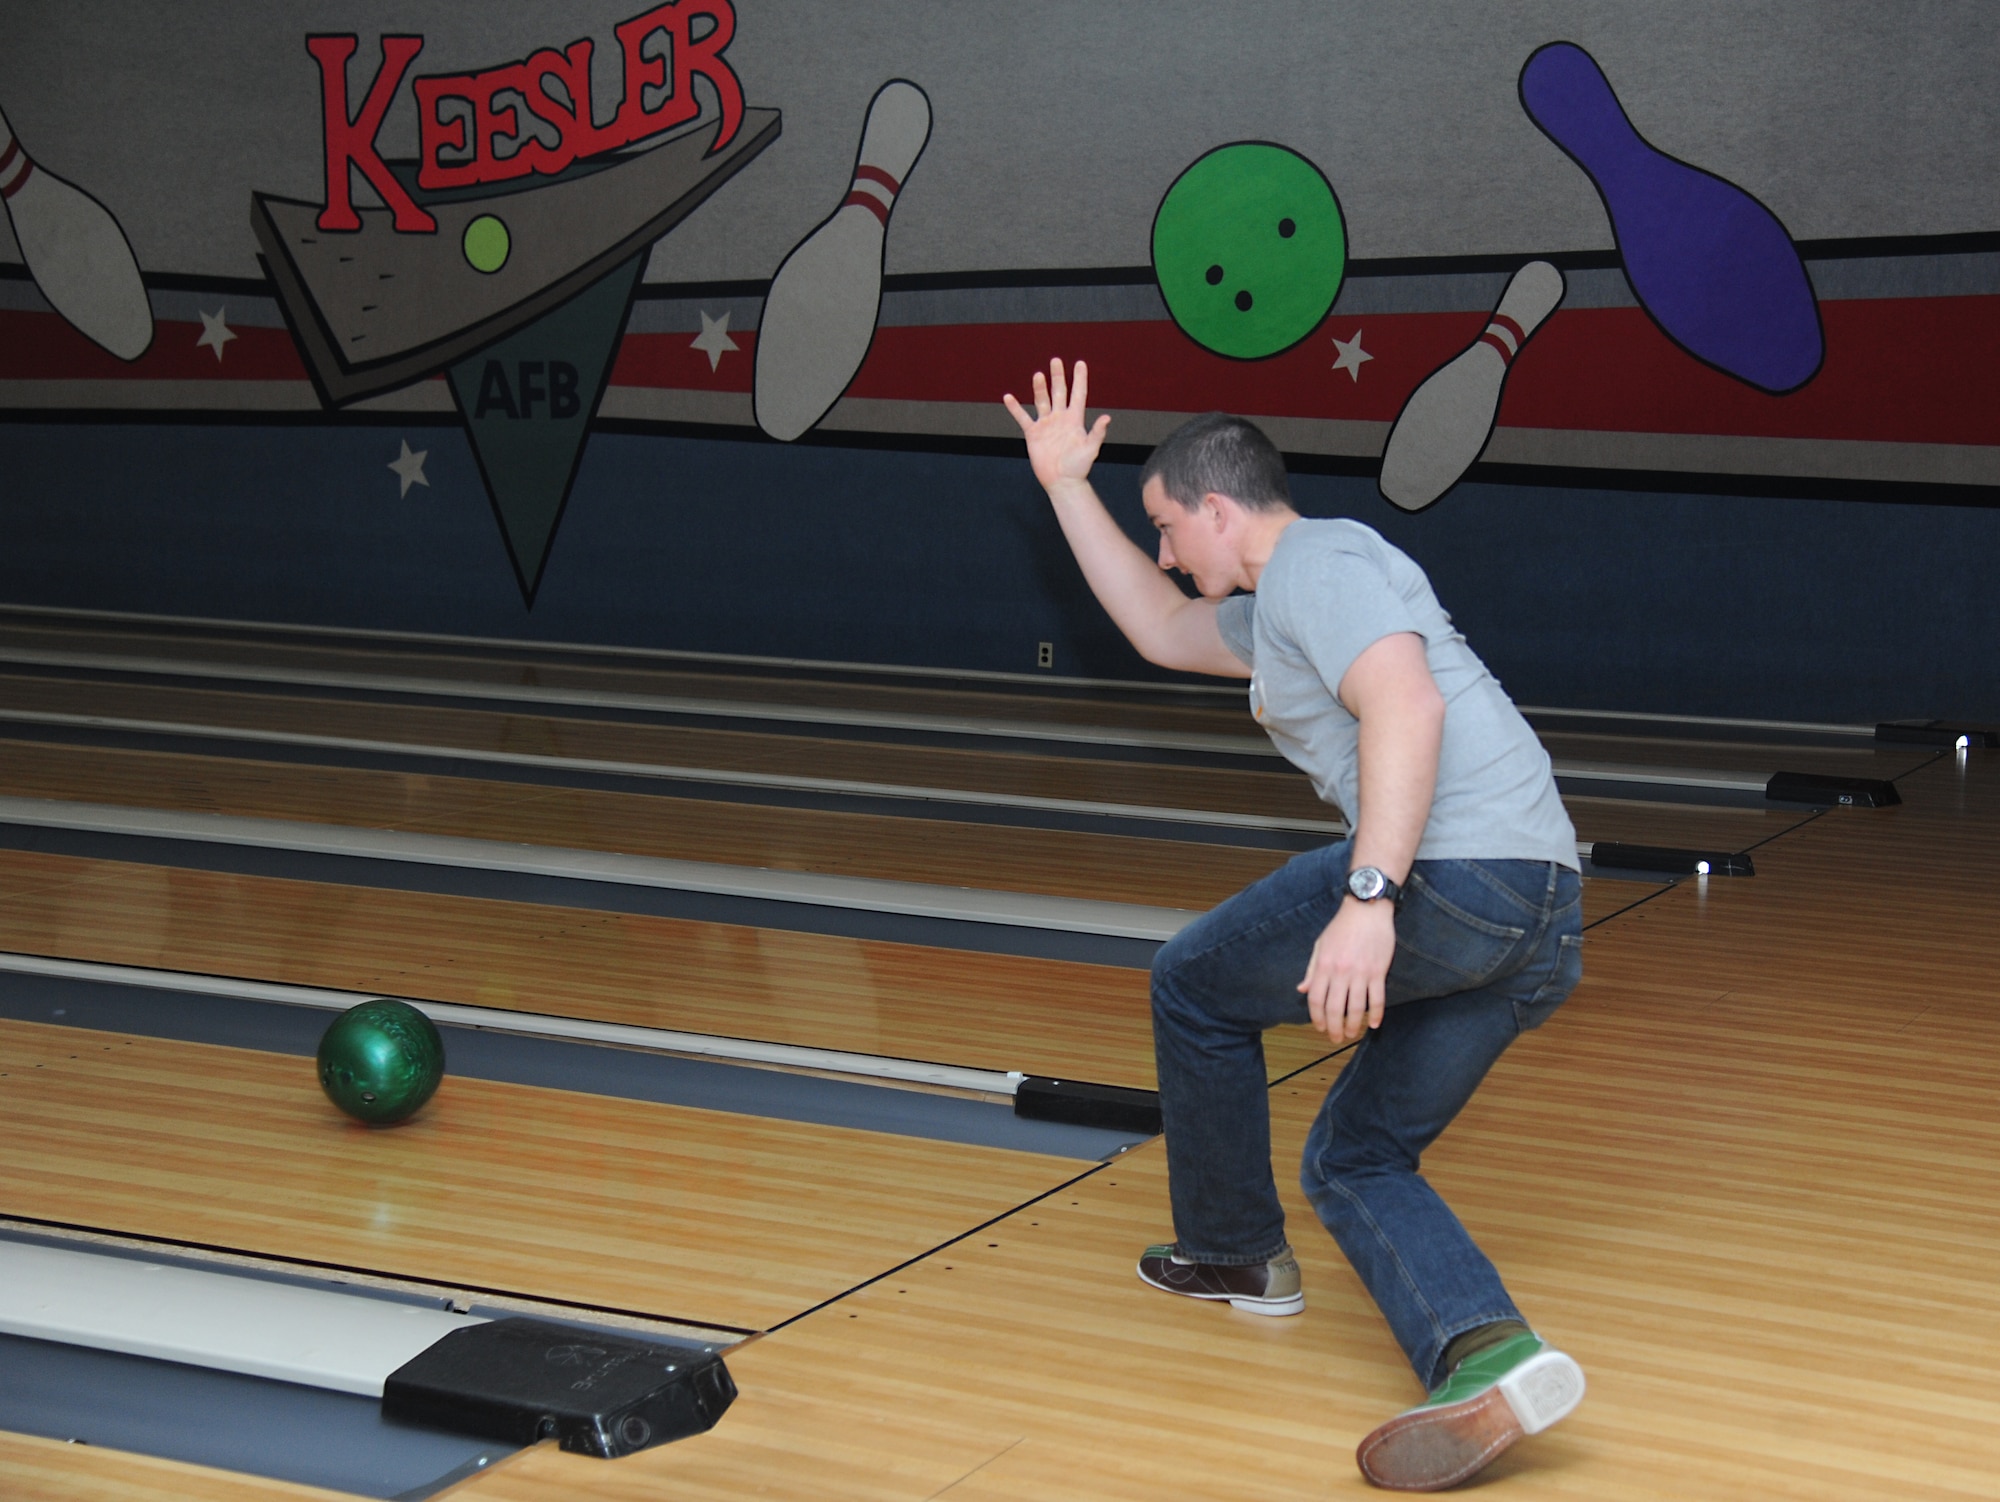 Airman Michael Ehlen, 335th Training Squadron student, sends his ball down the lane during a bowling tournament Feb. 13, 2015, at Gaudé Bowling Lanes, Keesler Air Force Base, Miss.  The African-American Heritage Committee hosted the event to celebrate Black History Month.  Nineteen teams of five people participated in the tournament.  (U.S. Air Force photo by Kemberly Groue)